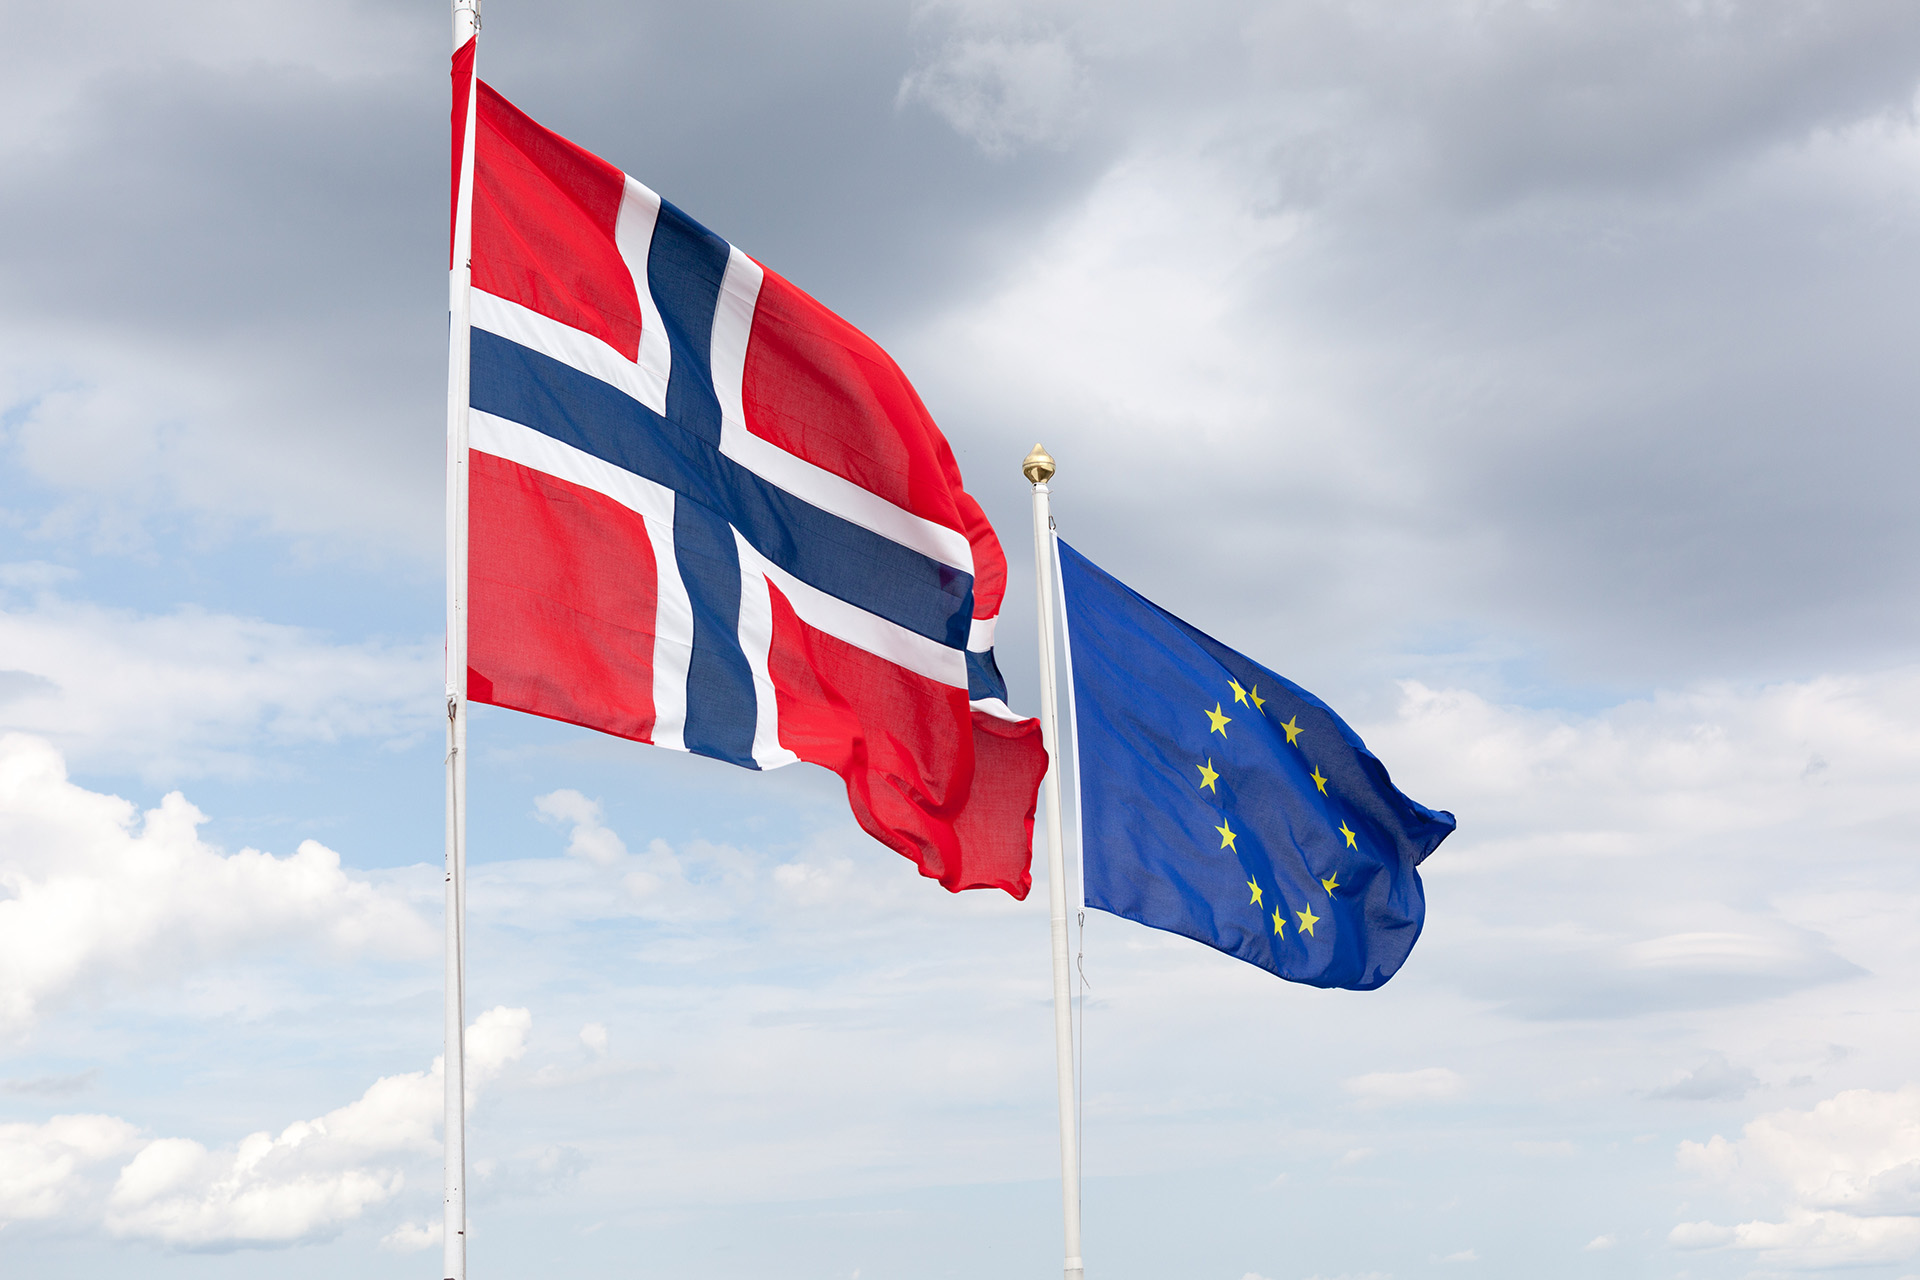 A Norwegian flag waves in the wind with a flag of the European Union in the background against a sky filled with clouds.